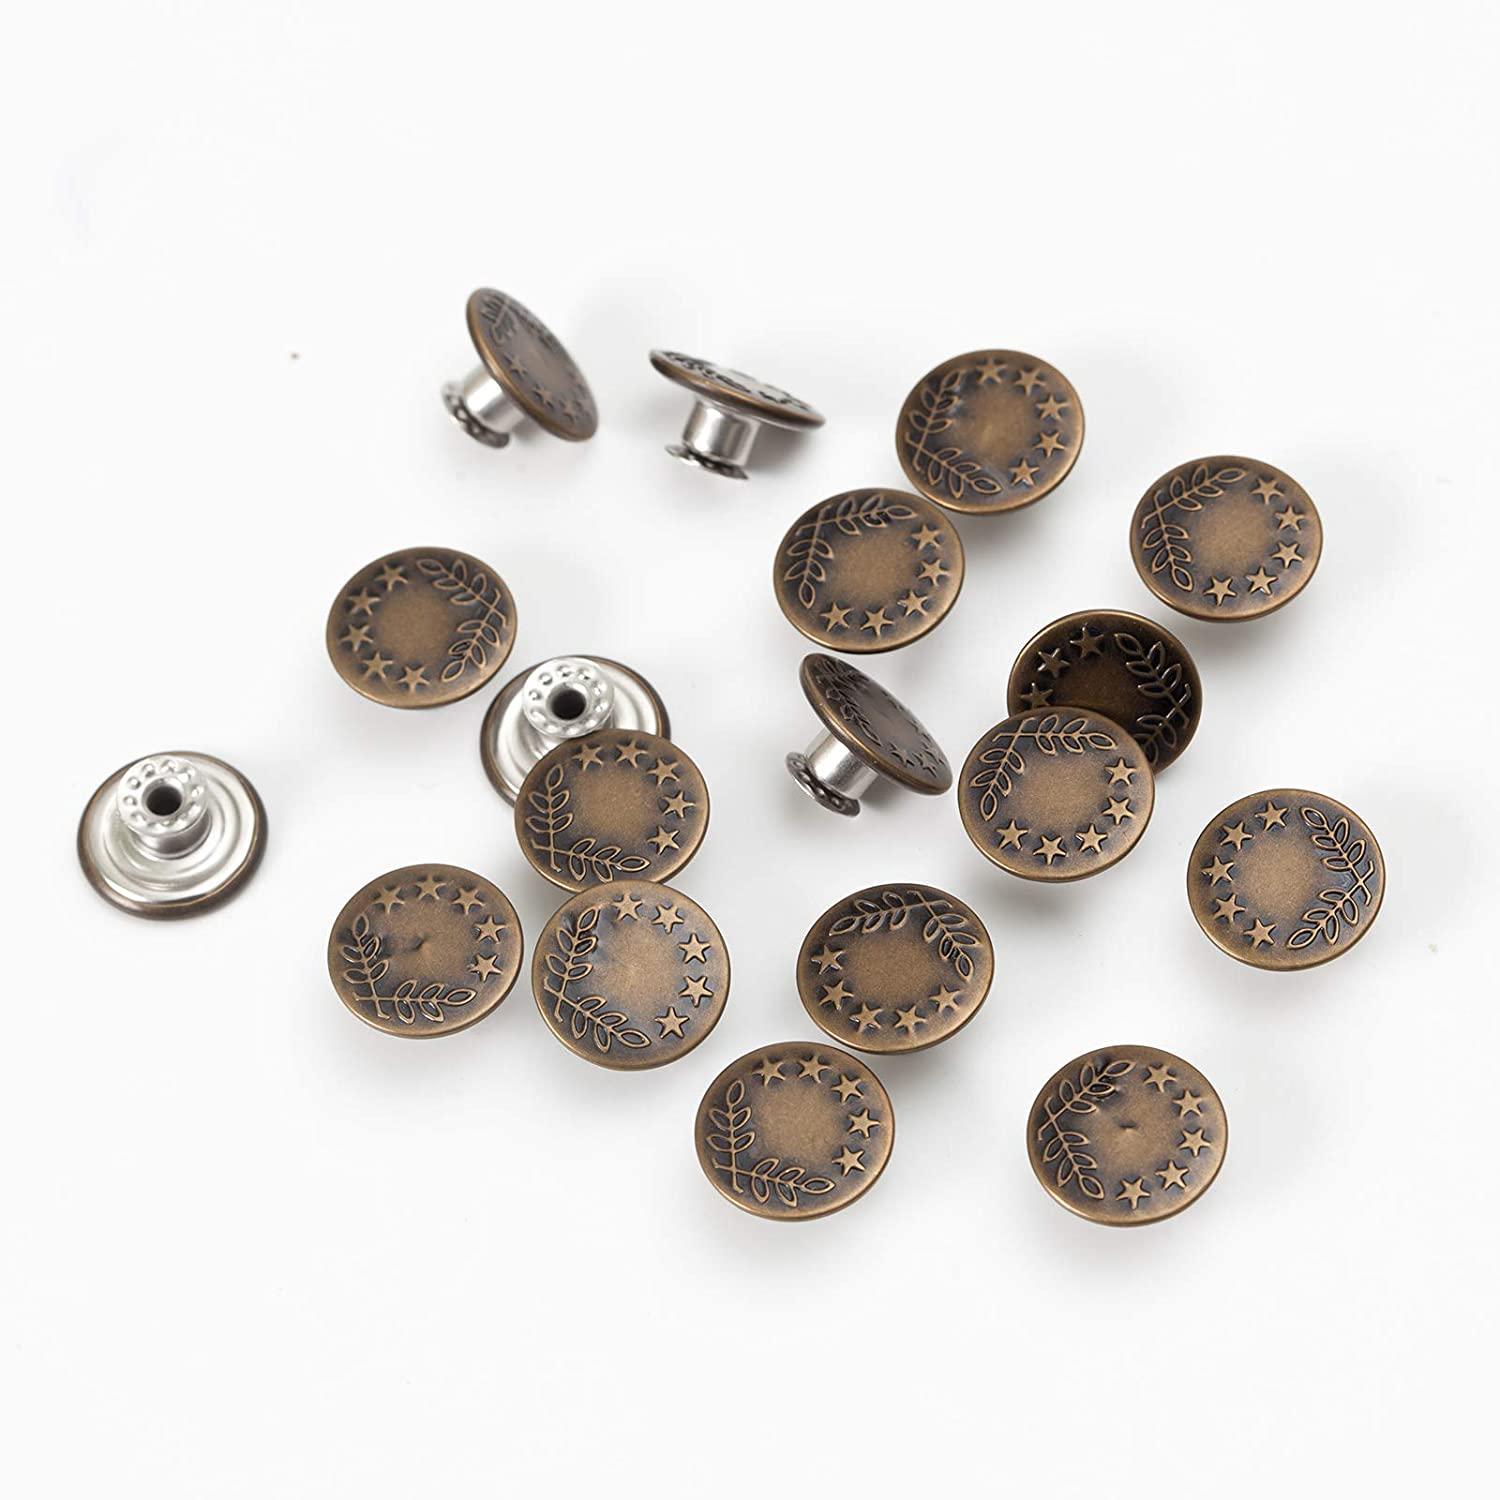 17 mm 20mm Jeans Buttons install Mold DIY accessories Jeans button tools  Metal eyelets molds dies - Price history & Review, AliExpress Seller -  DoonLoo Official Store